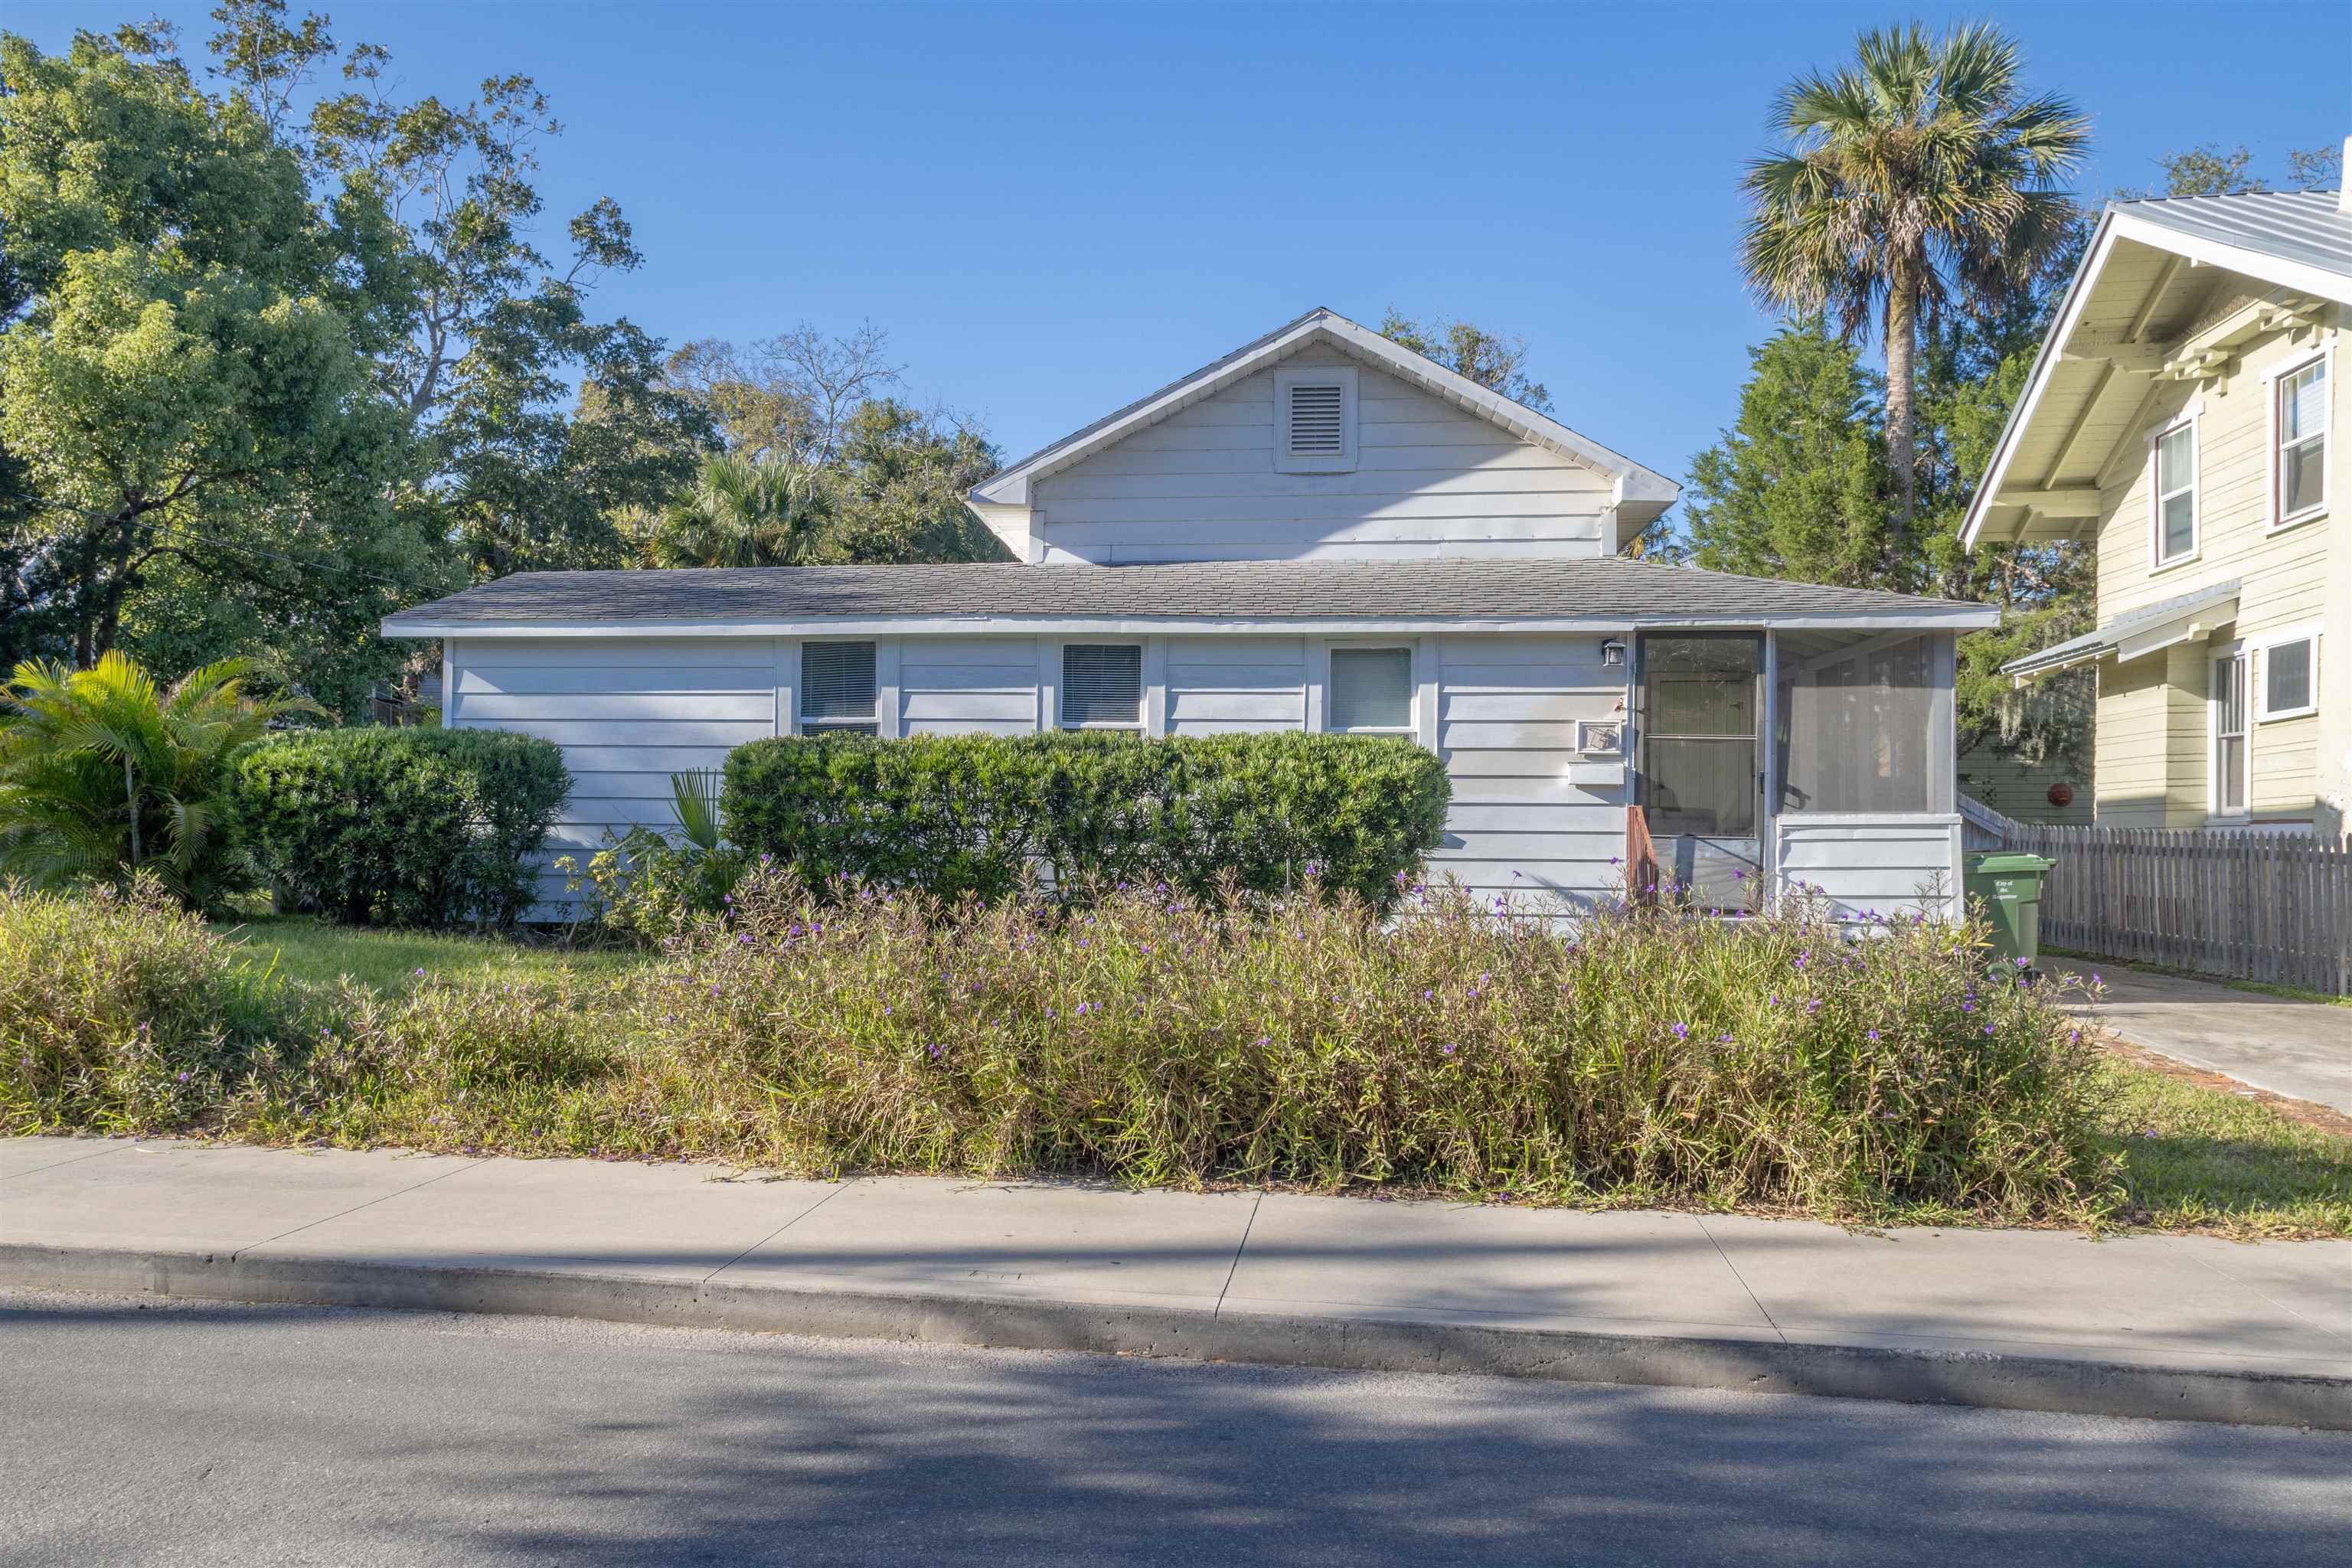 1936 Vintage Lincolnville cottage located in downtown St Augustine. Just a short walk to the Bayfront and lake Maria Sanchez. This home sits on a hard to find spacious 82x105 lot, which offers room and potential for more development!